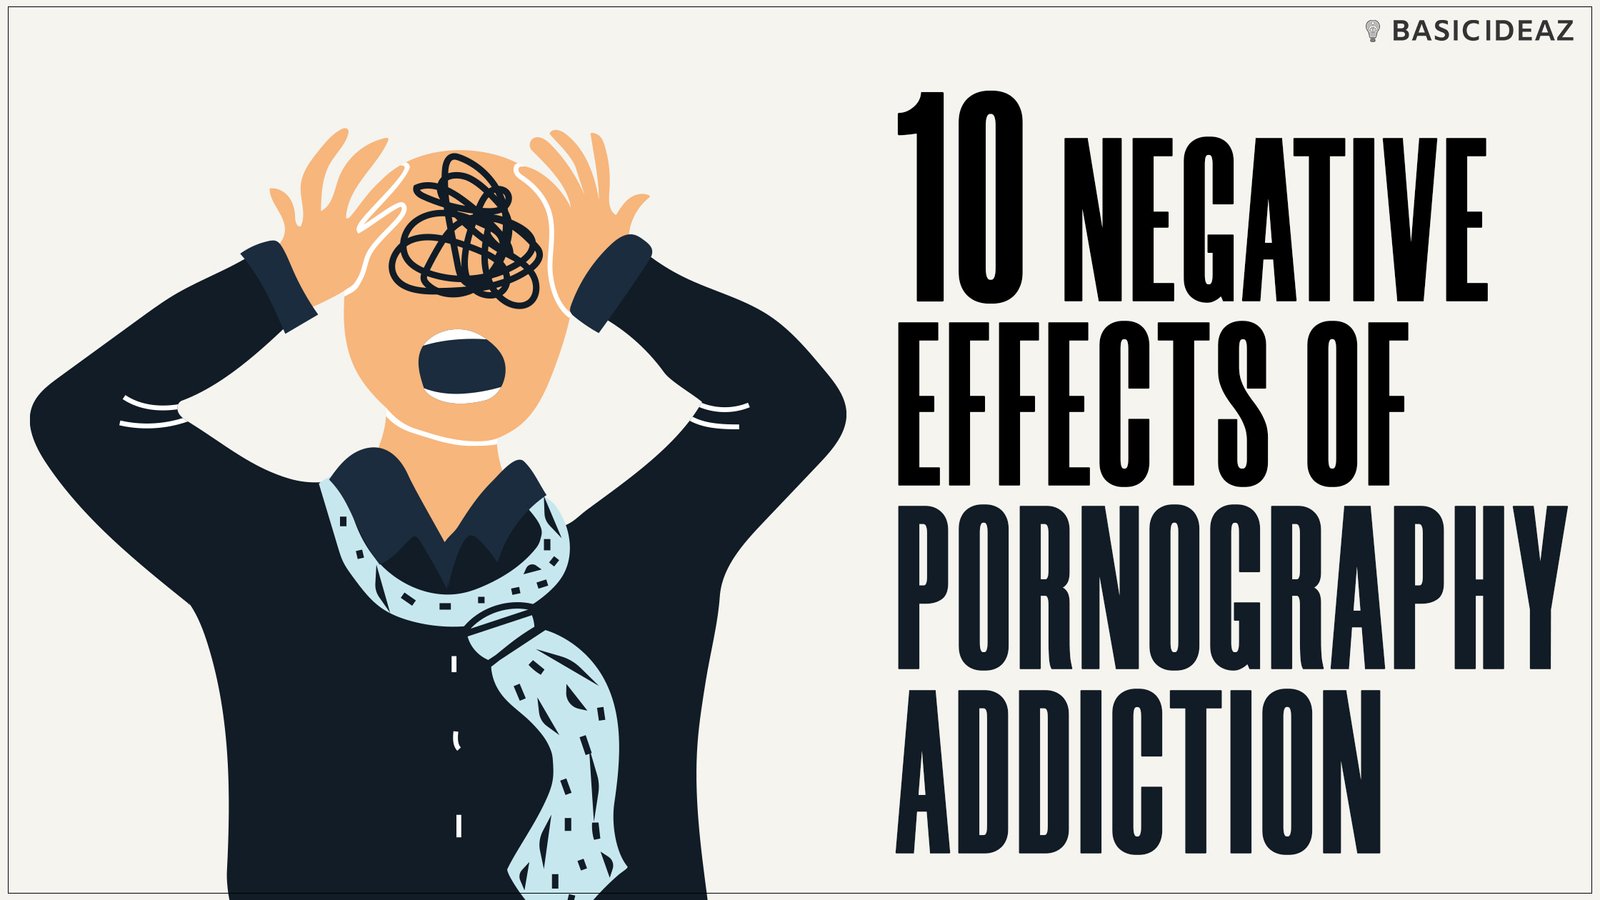 Effects Of Watching Porn - 10 Negative Effects of Pornography Addiction - BasicIdeaz